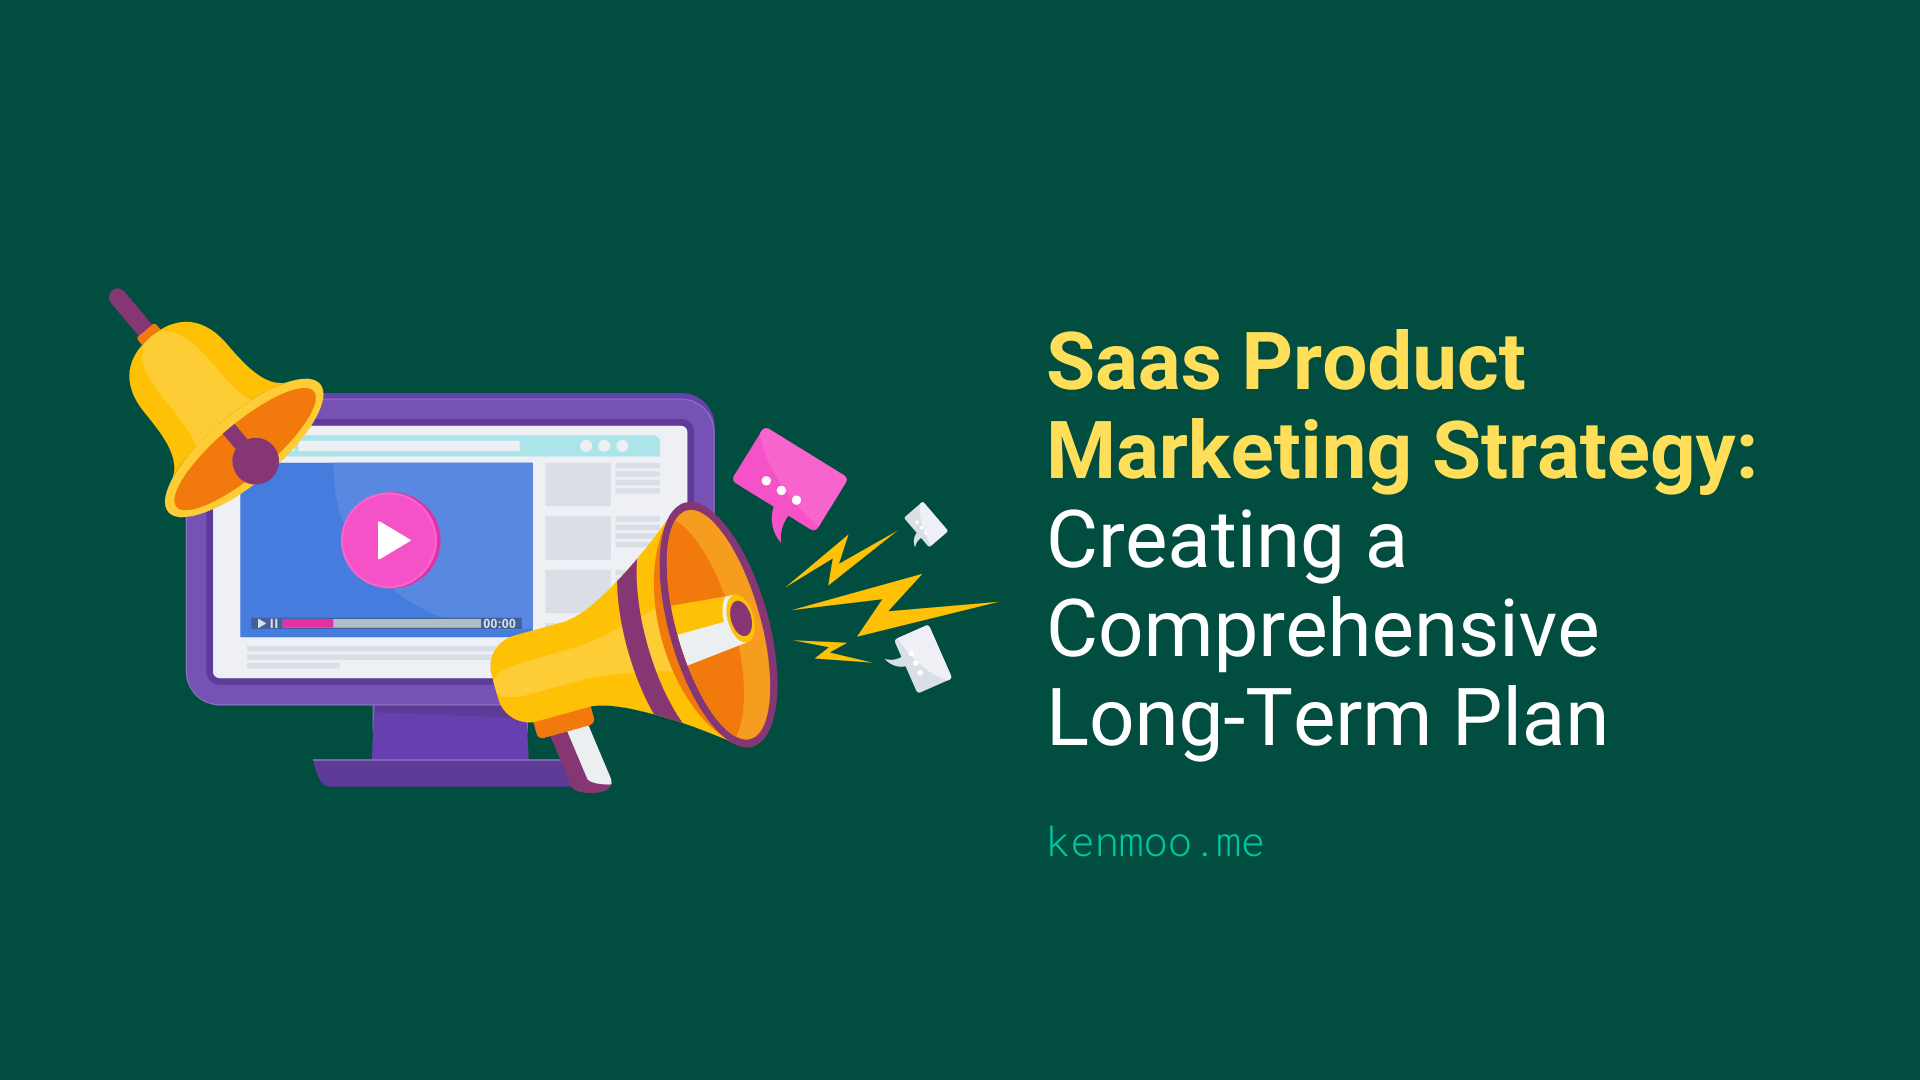 SaaS Product Marketing Strategy: Creating a Comprehensive Long-Term Plan